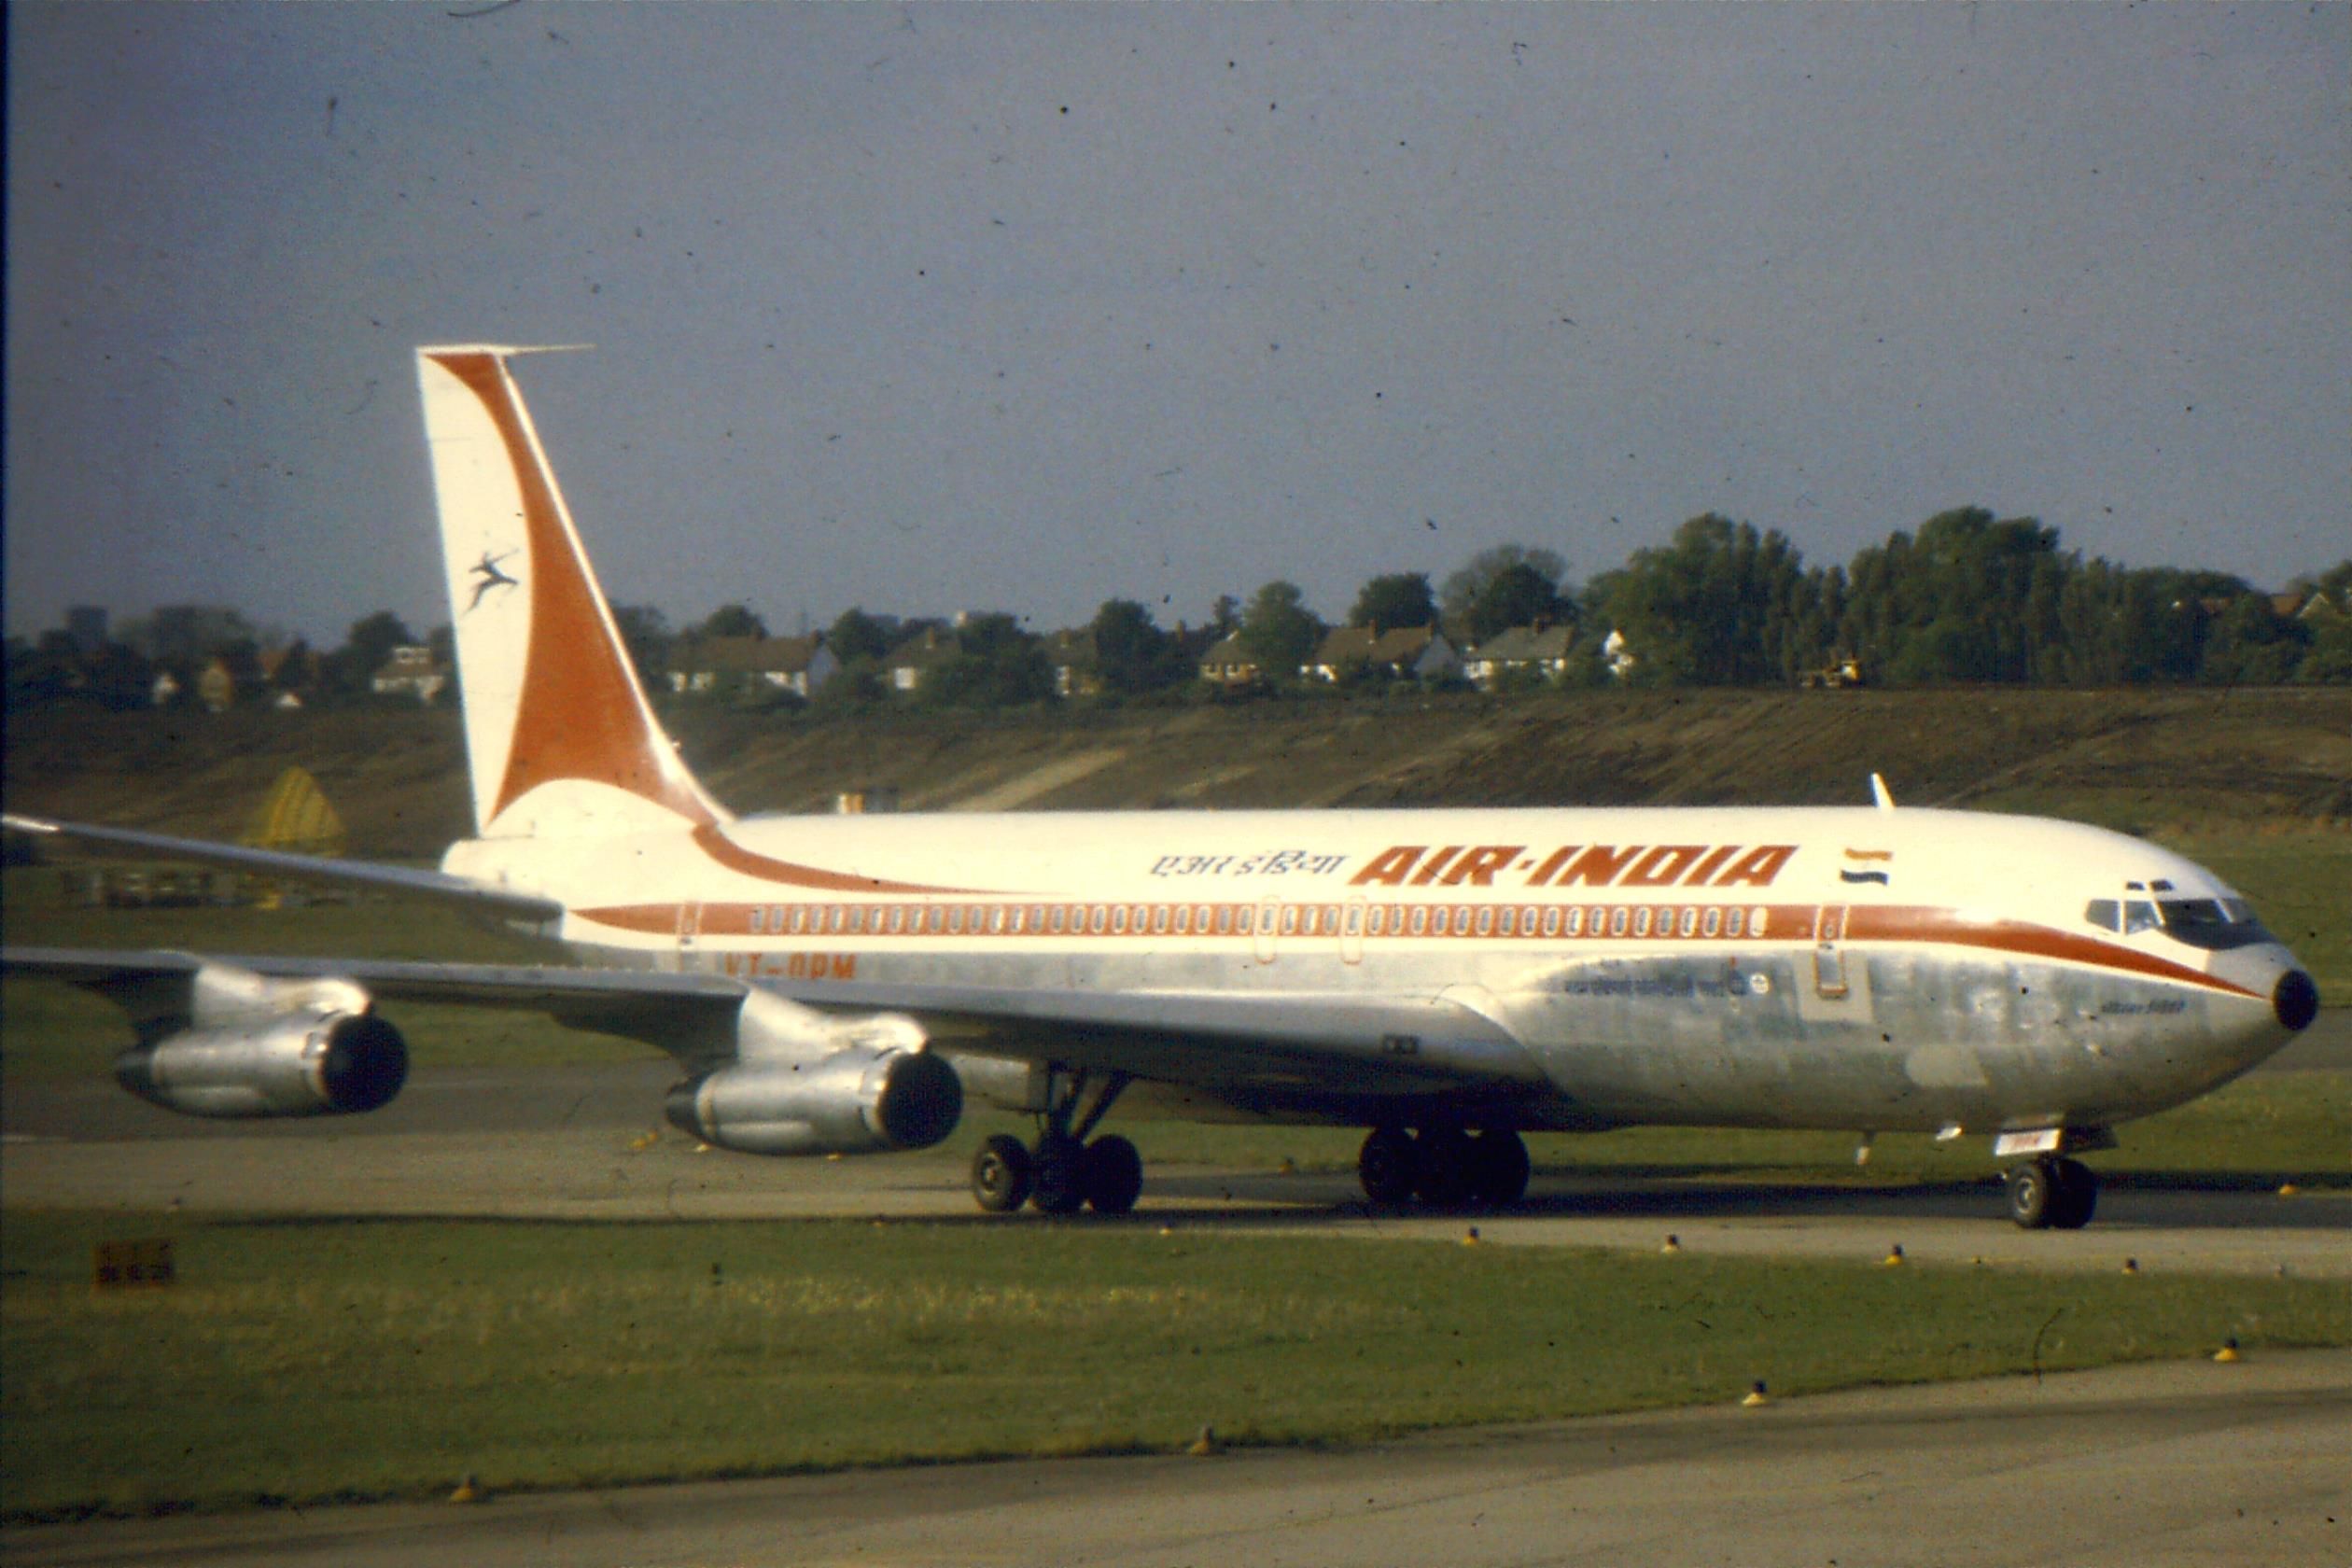 An Air India Boeing 707 on an airport apron.